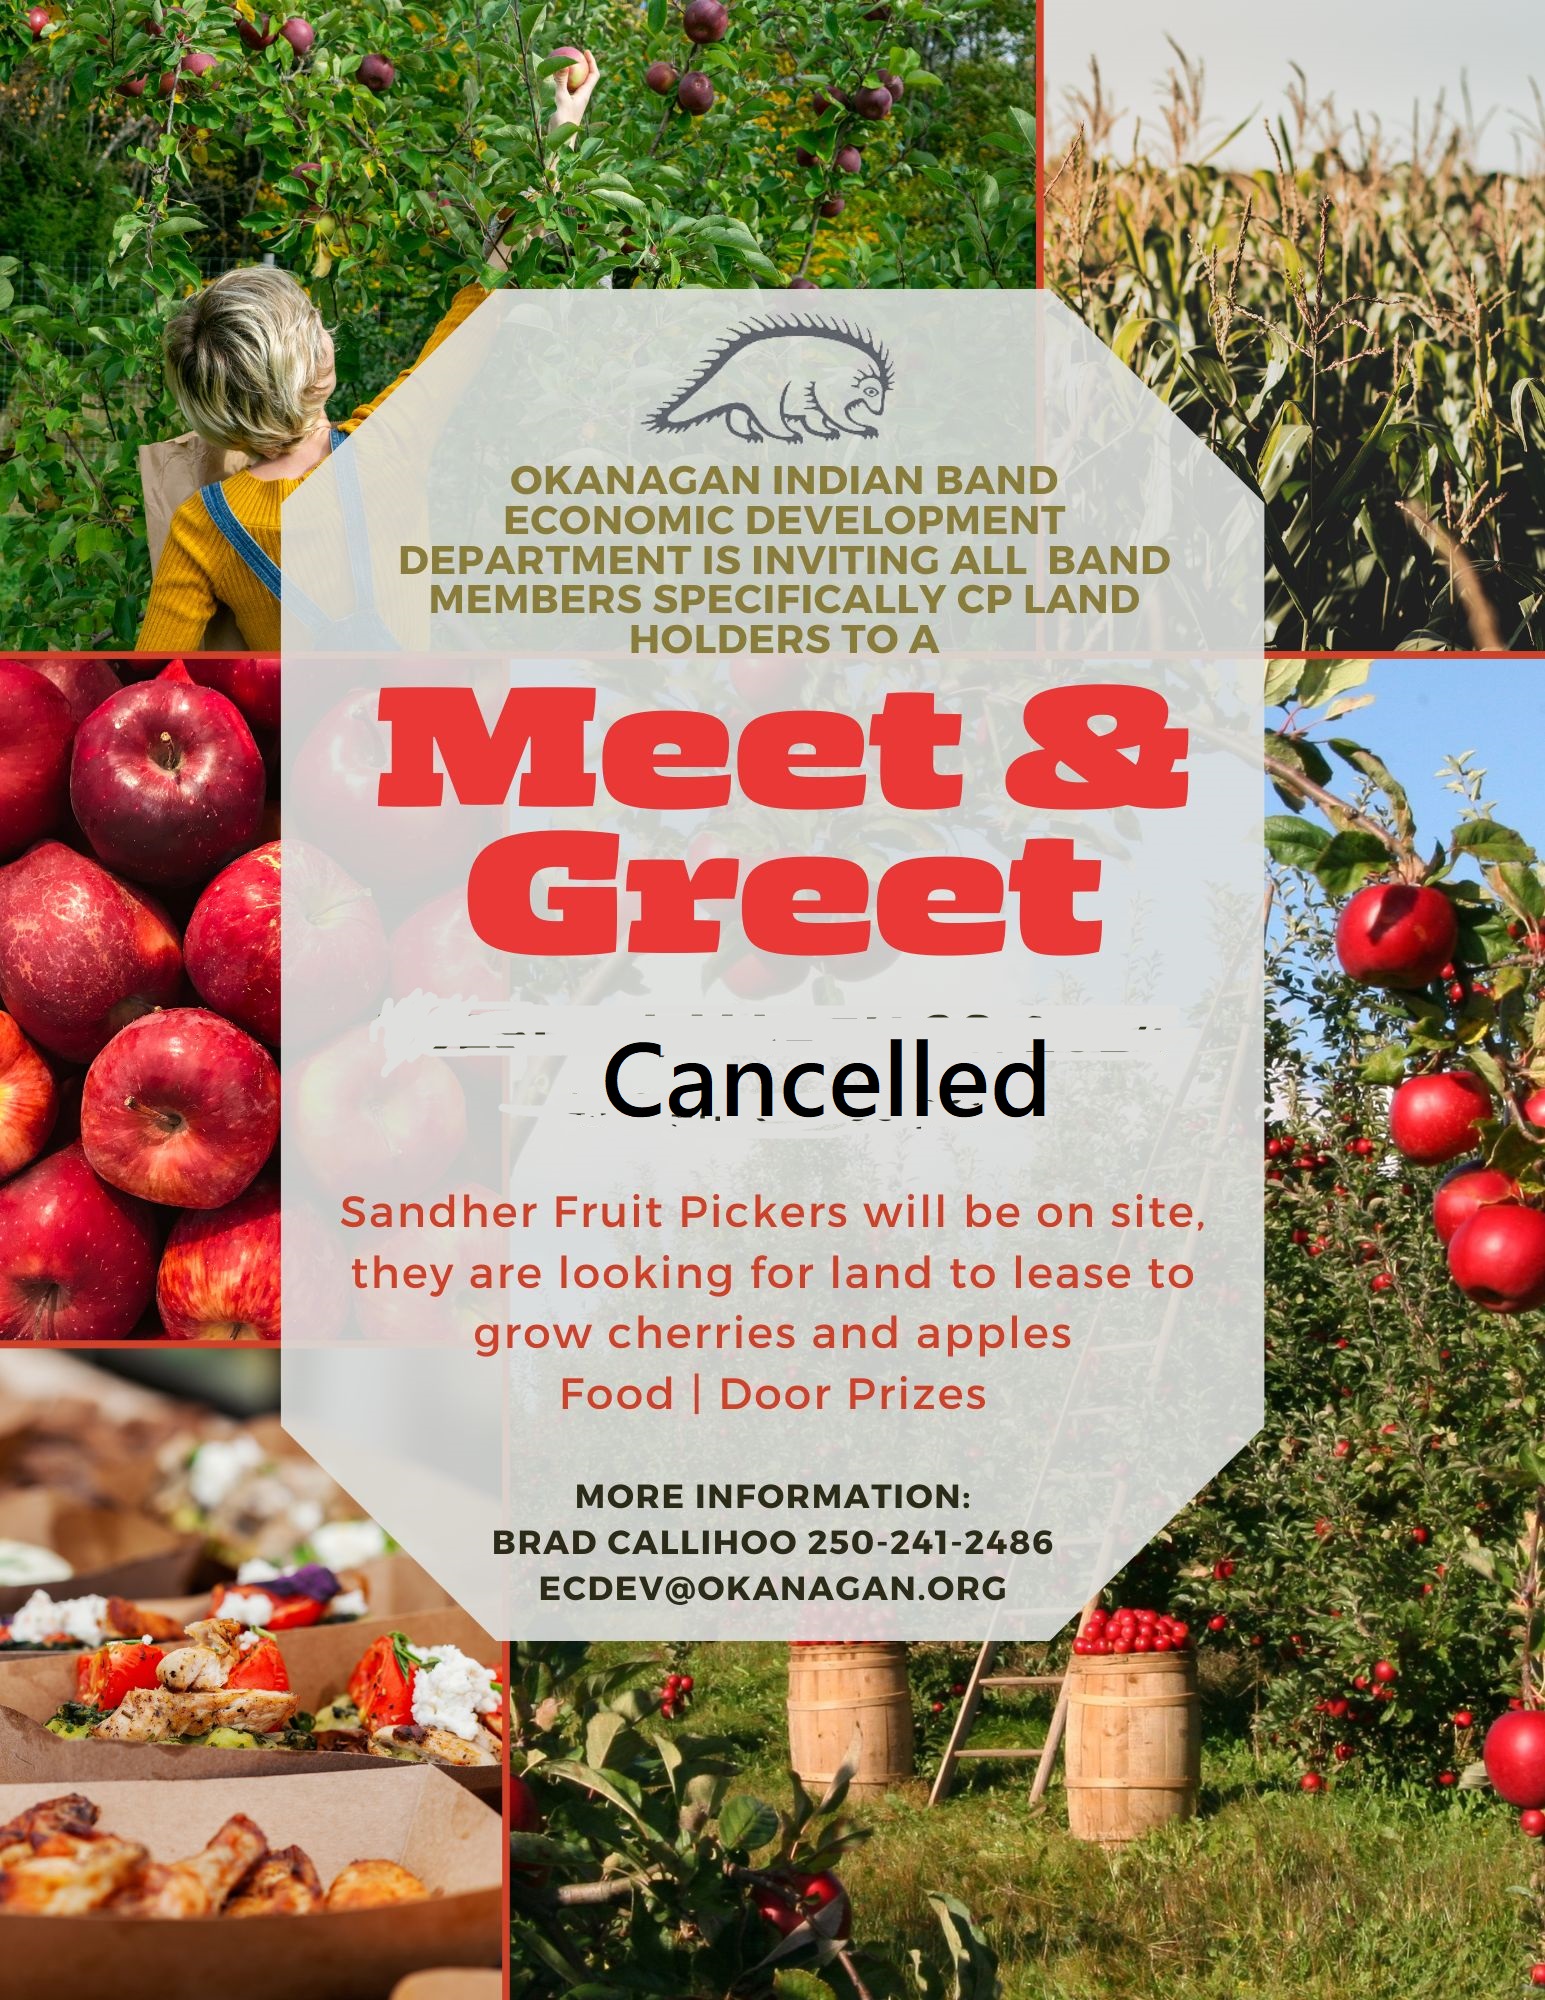 Economic Development Meet & Greet event for this evening, March 26th cancelled.